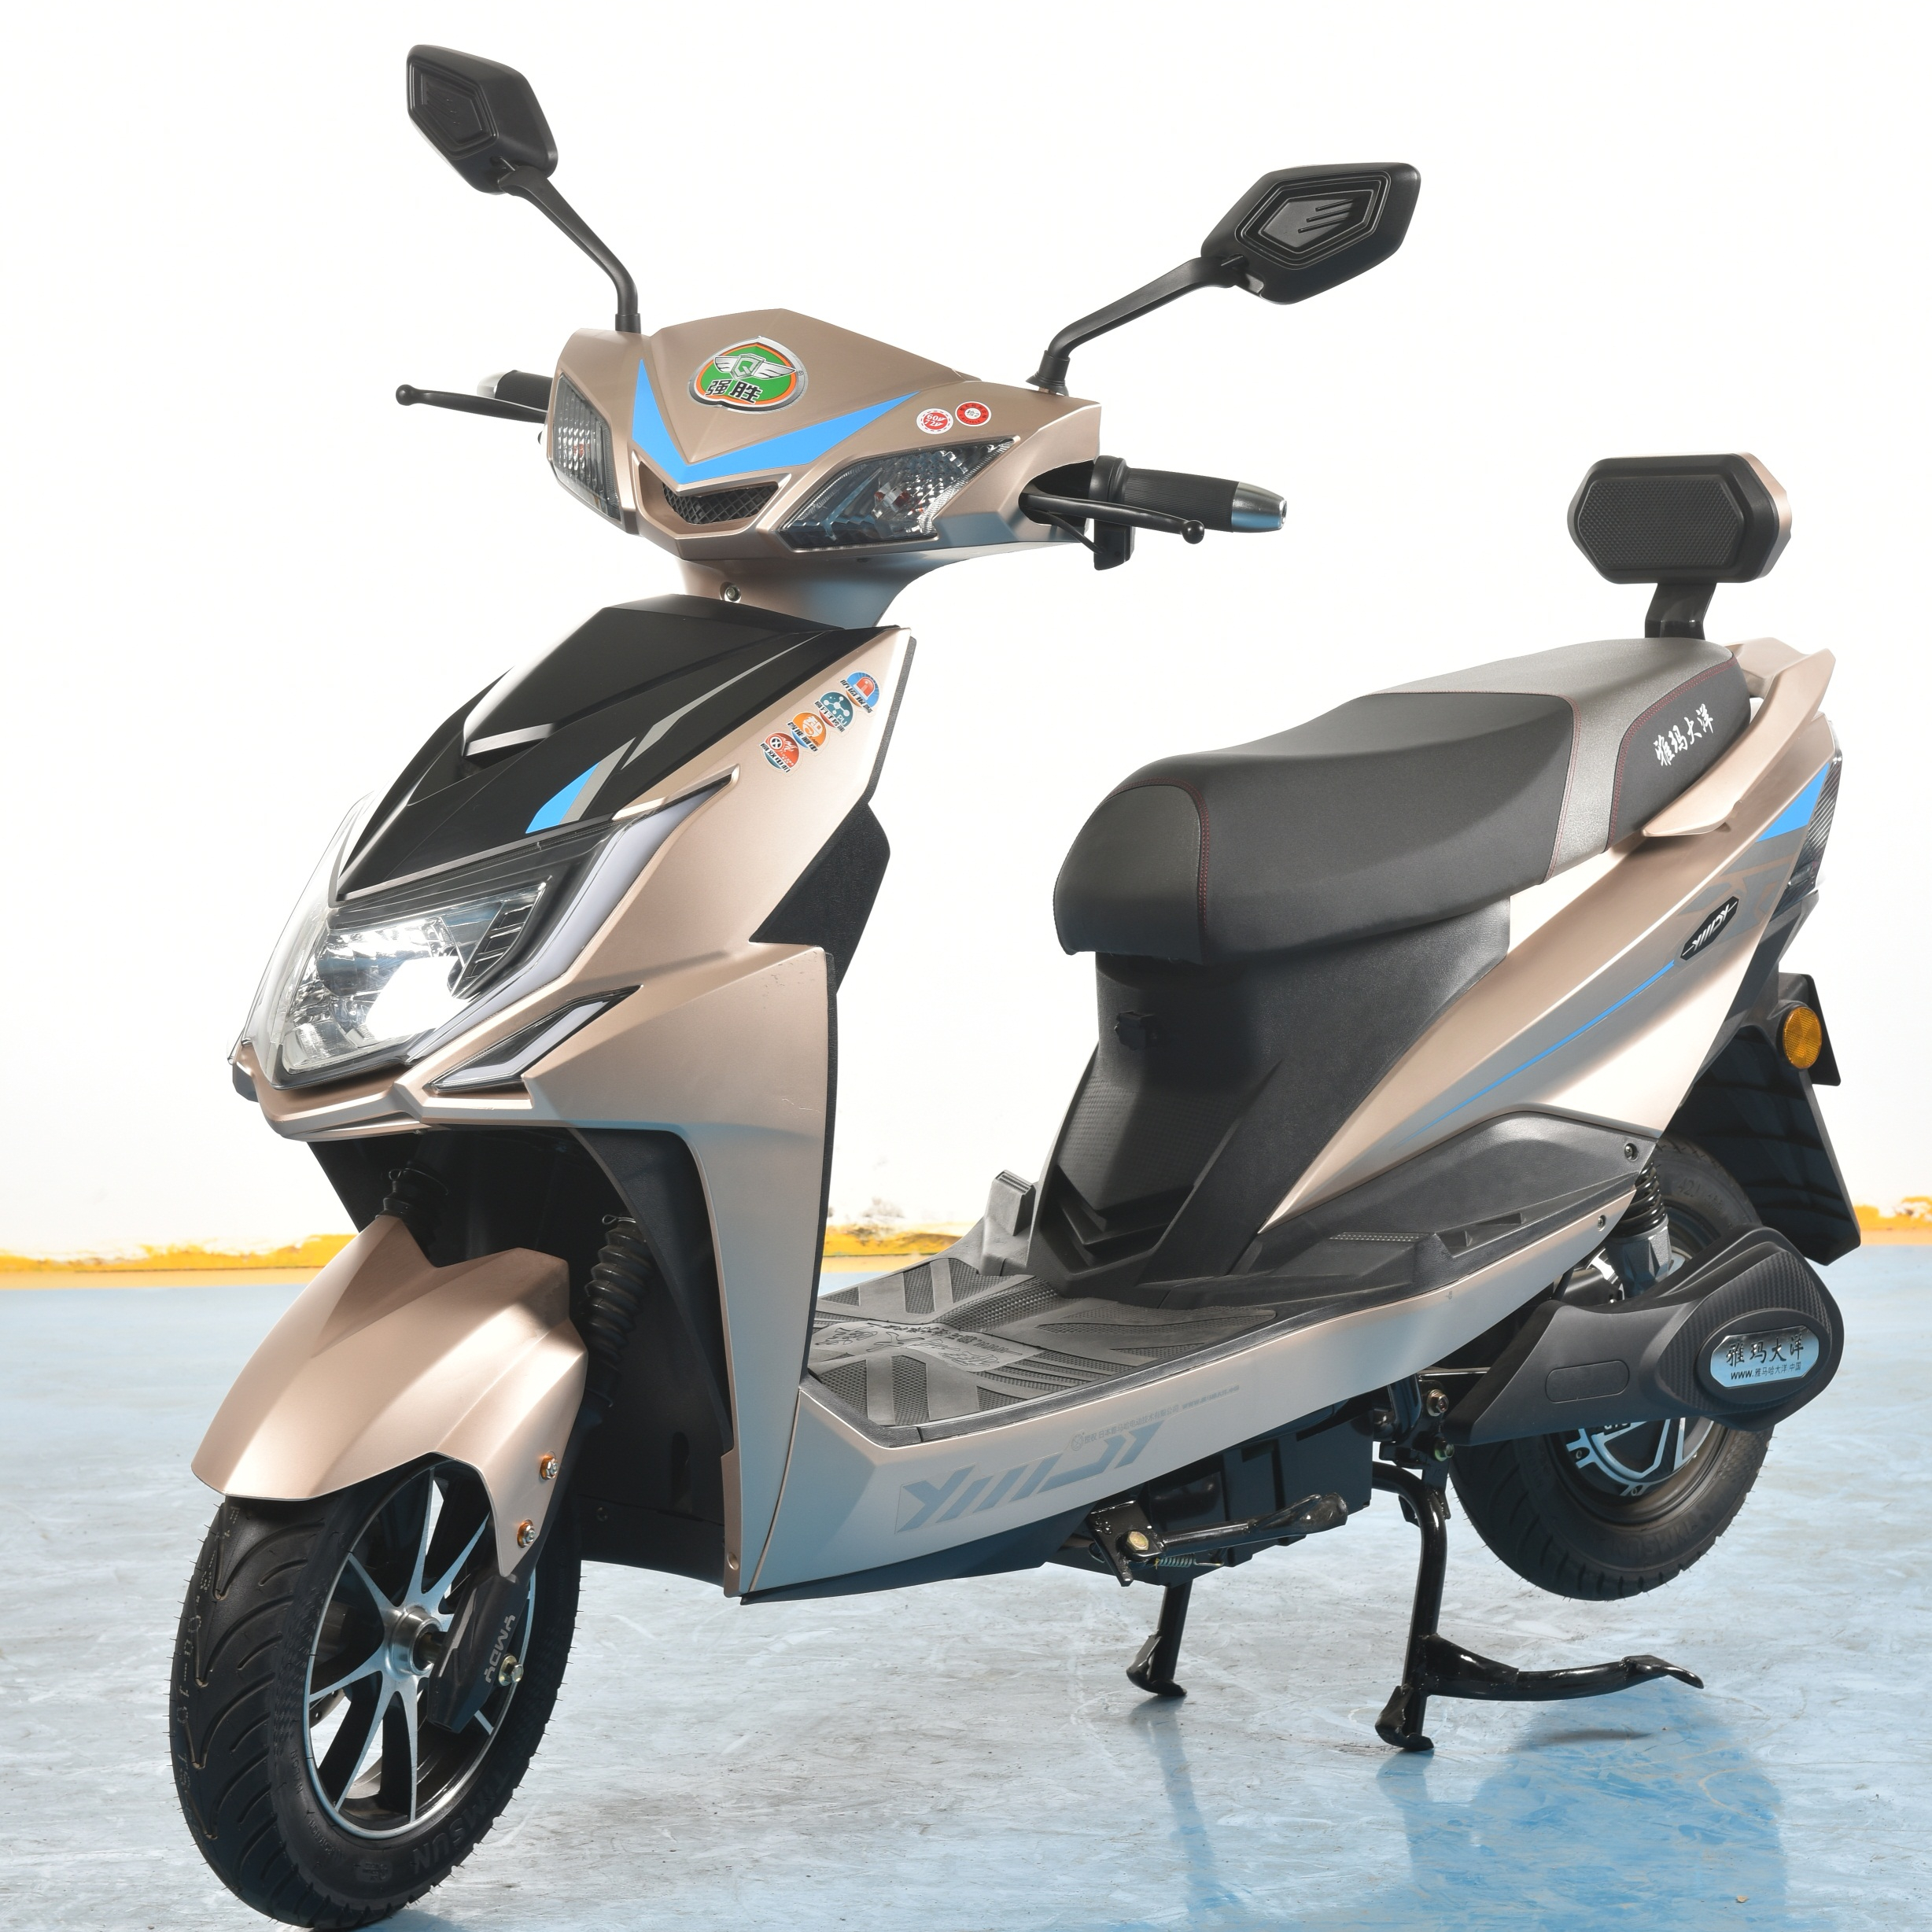 China Wholesale Battery Auto Rickshaw Price List Quotes - Bajaj auto pulsar motorcycle two wheels electric scooters vehicle manufacturer best price – Qiangsheng